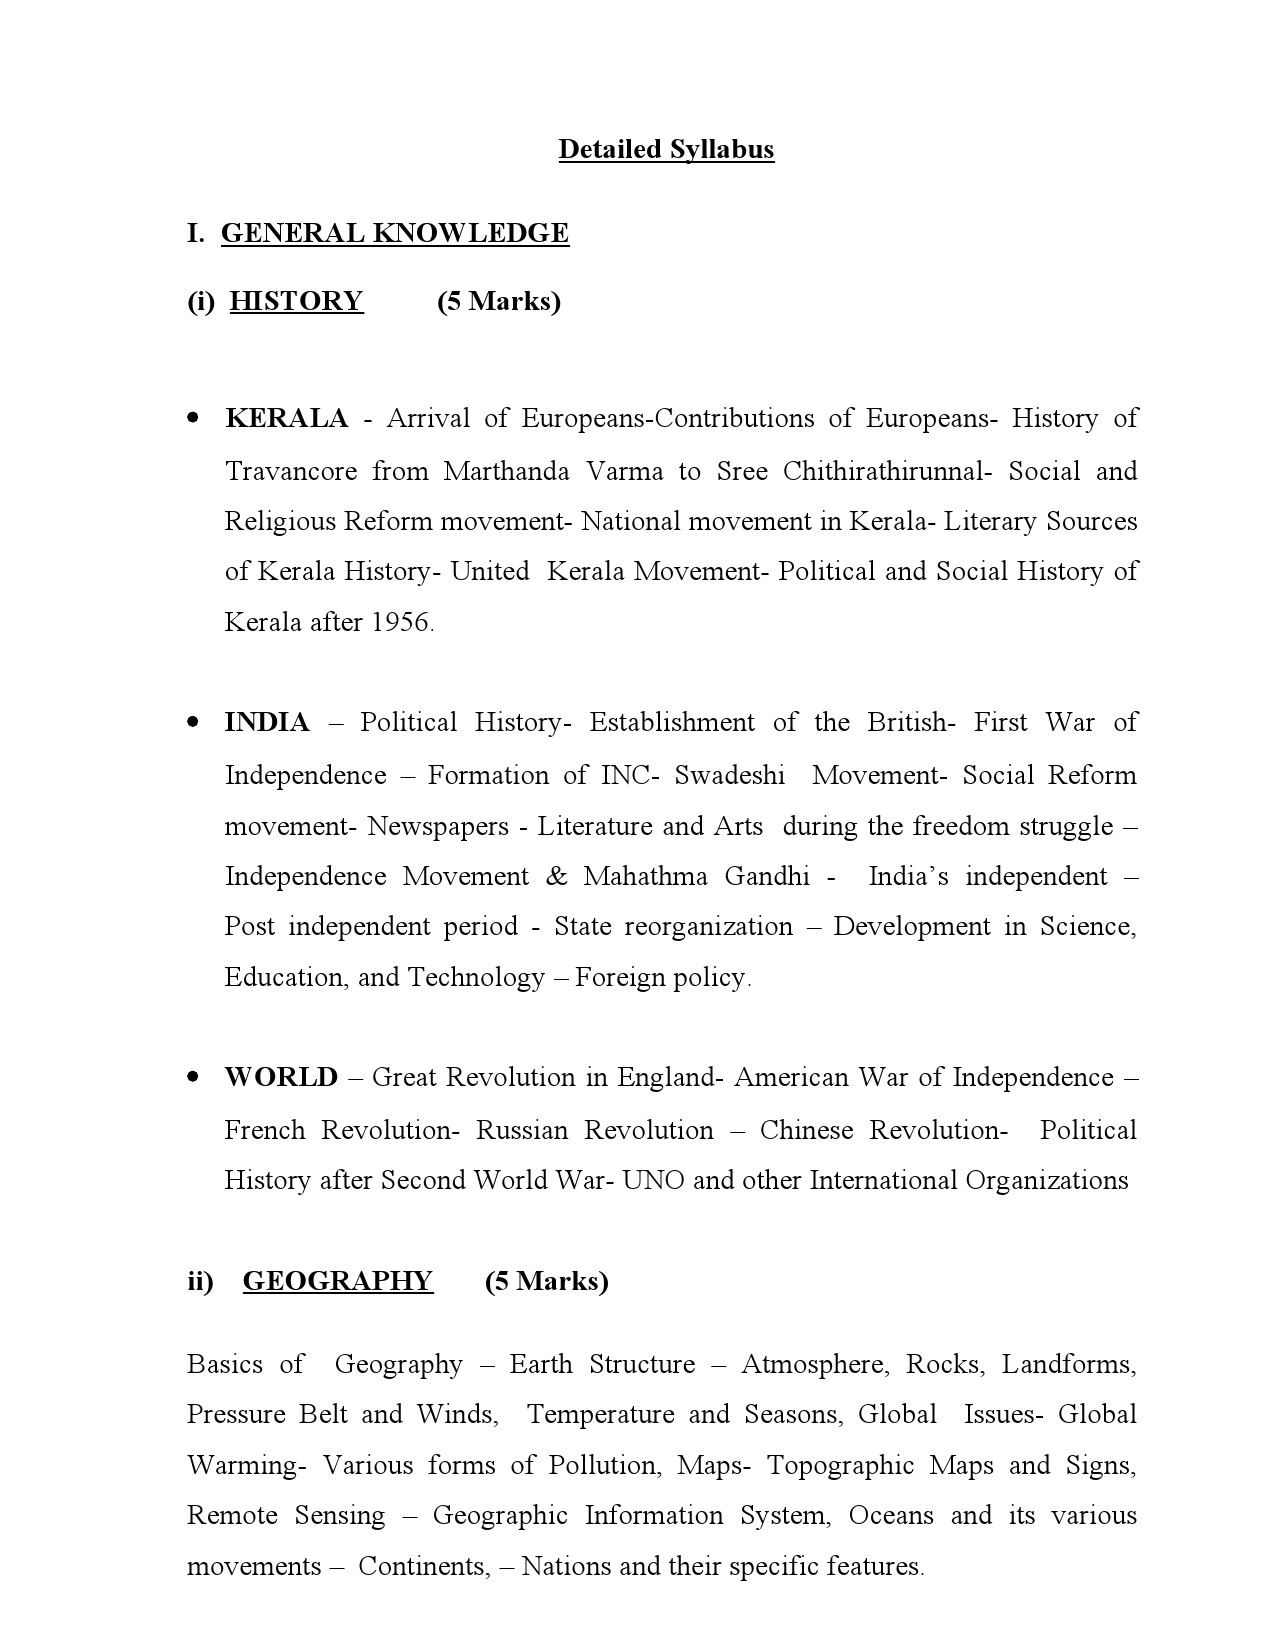 Detailed Syllabus Of Main Exam 2023 For Assistant In Universitites - Notification Image 2